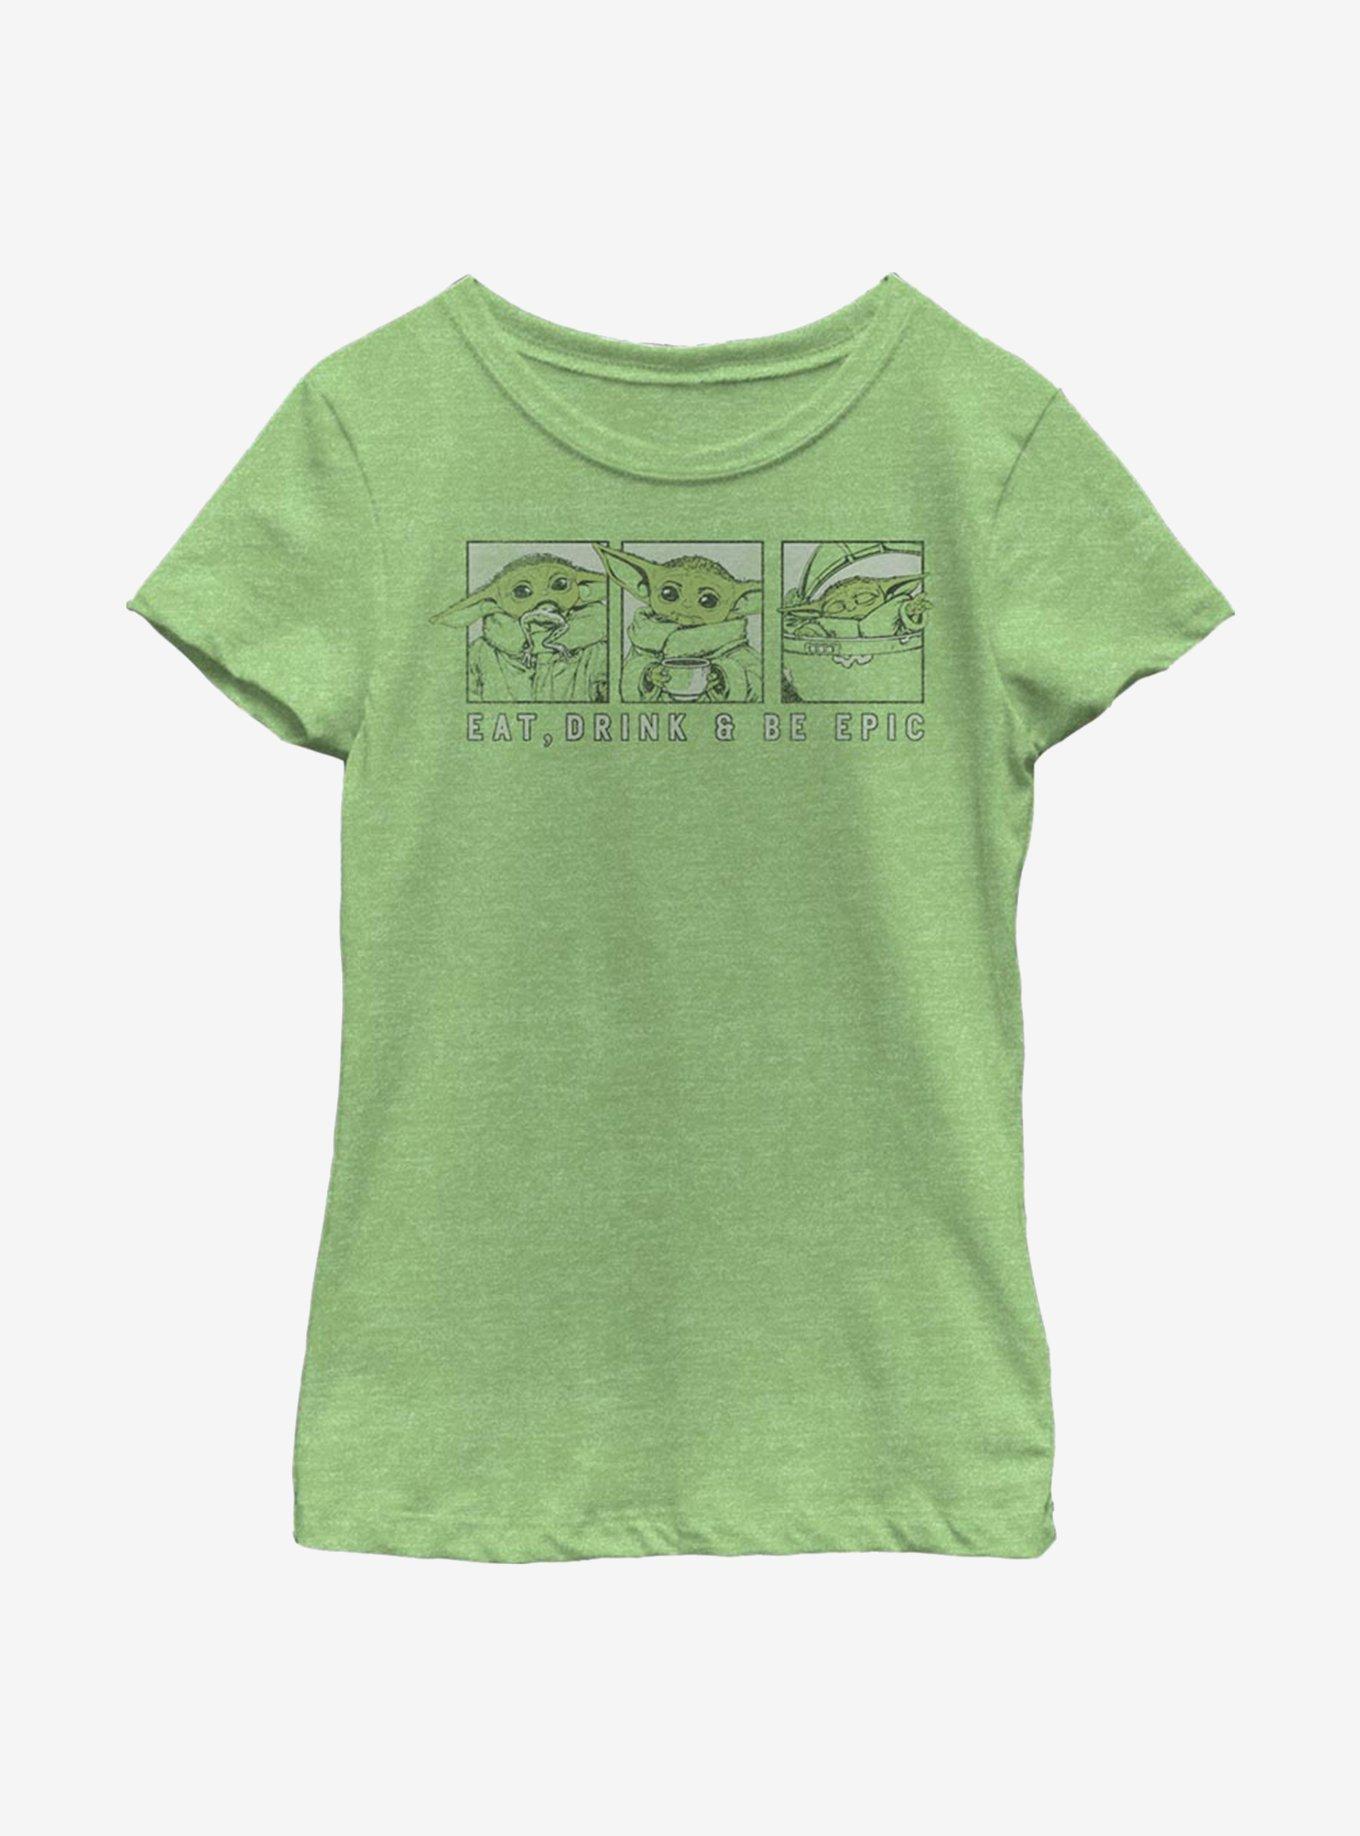 Star Wars The Mandalorian The Child Eat, Drink & Be Epic Youth Girls T-Shirt, GRN APPLE, hi-res